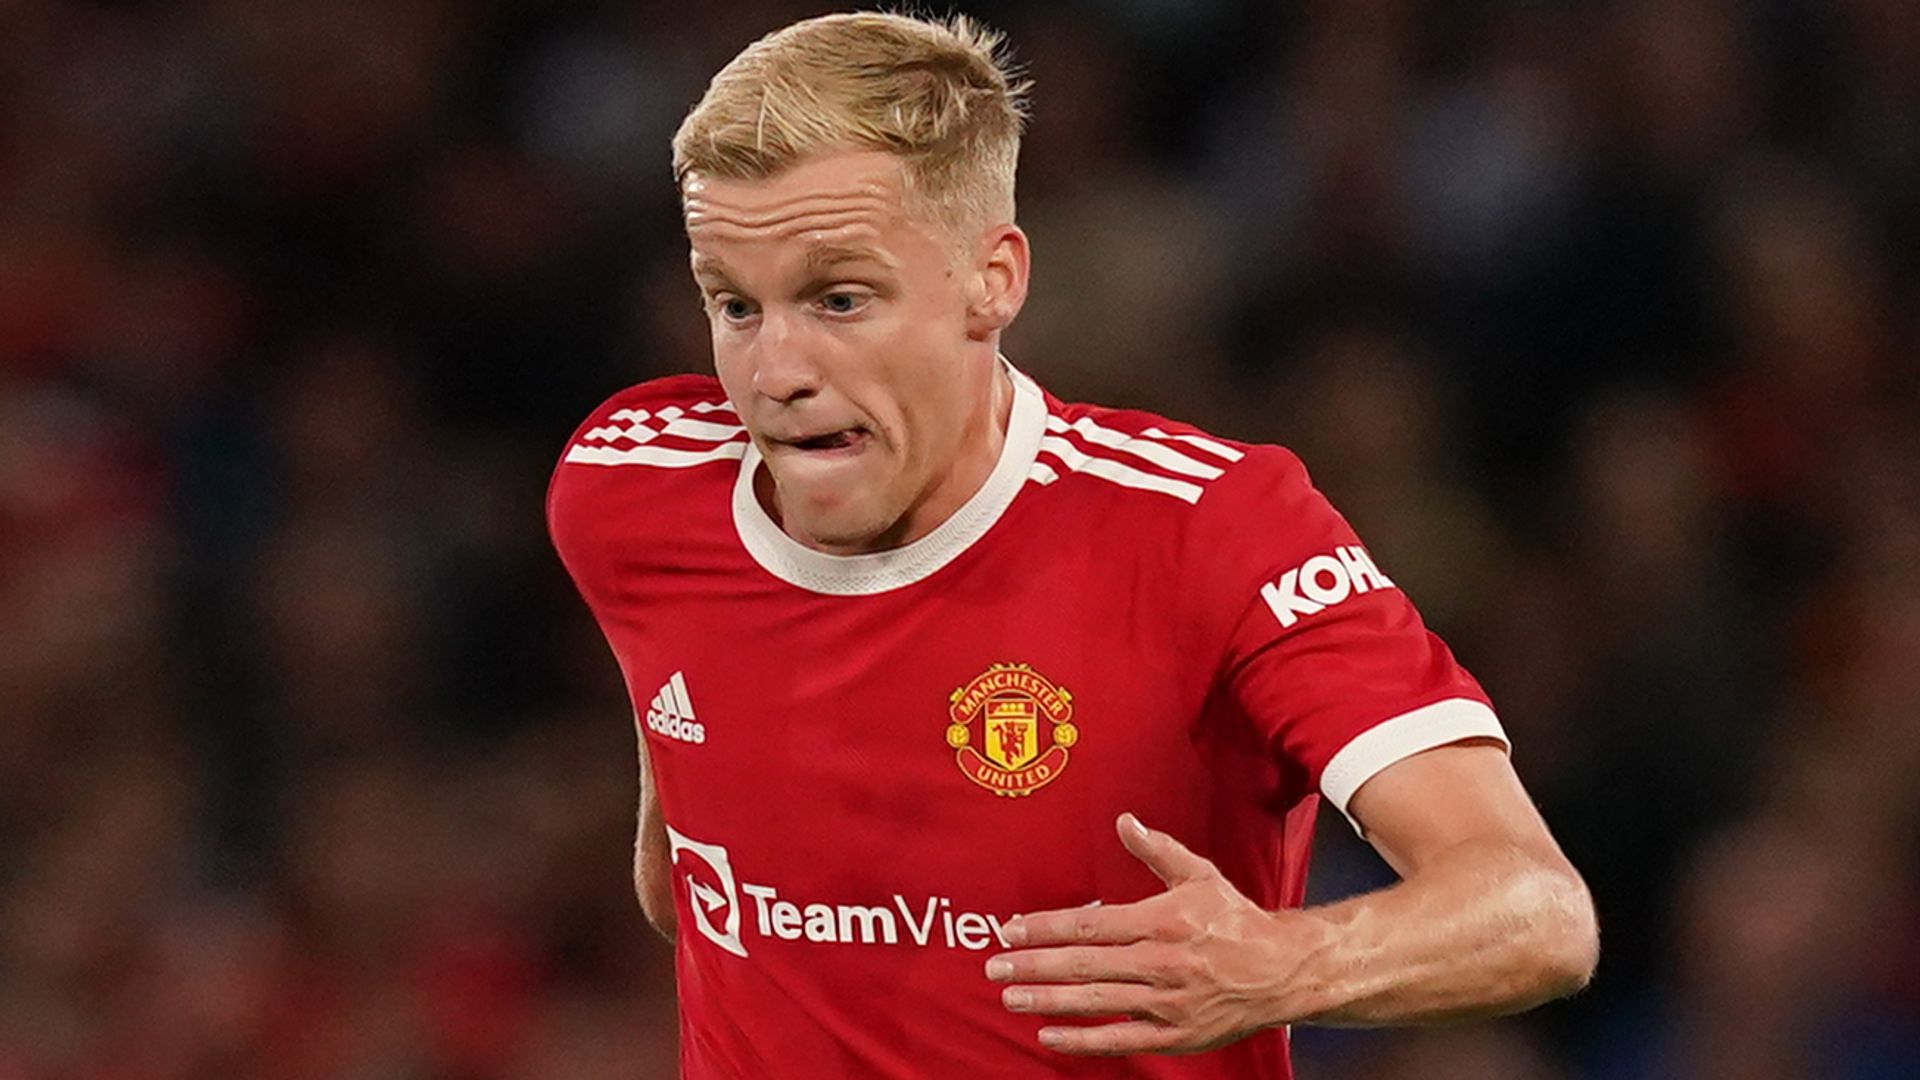 Donny van de Beek: Crystal Palace want Manchester United midfielder on loan before transfer window closes